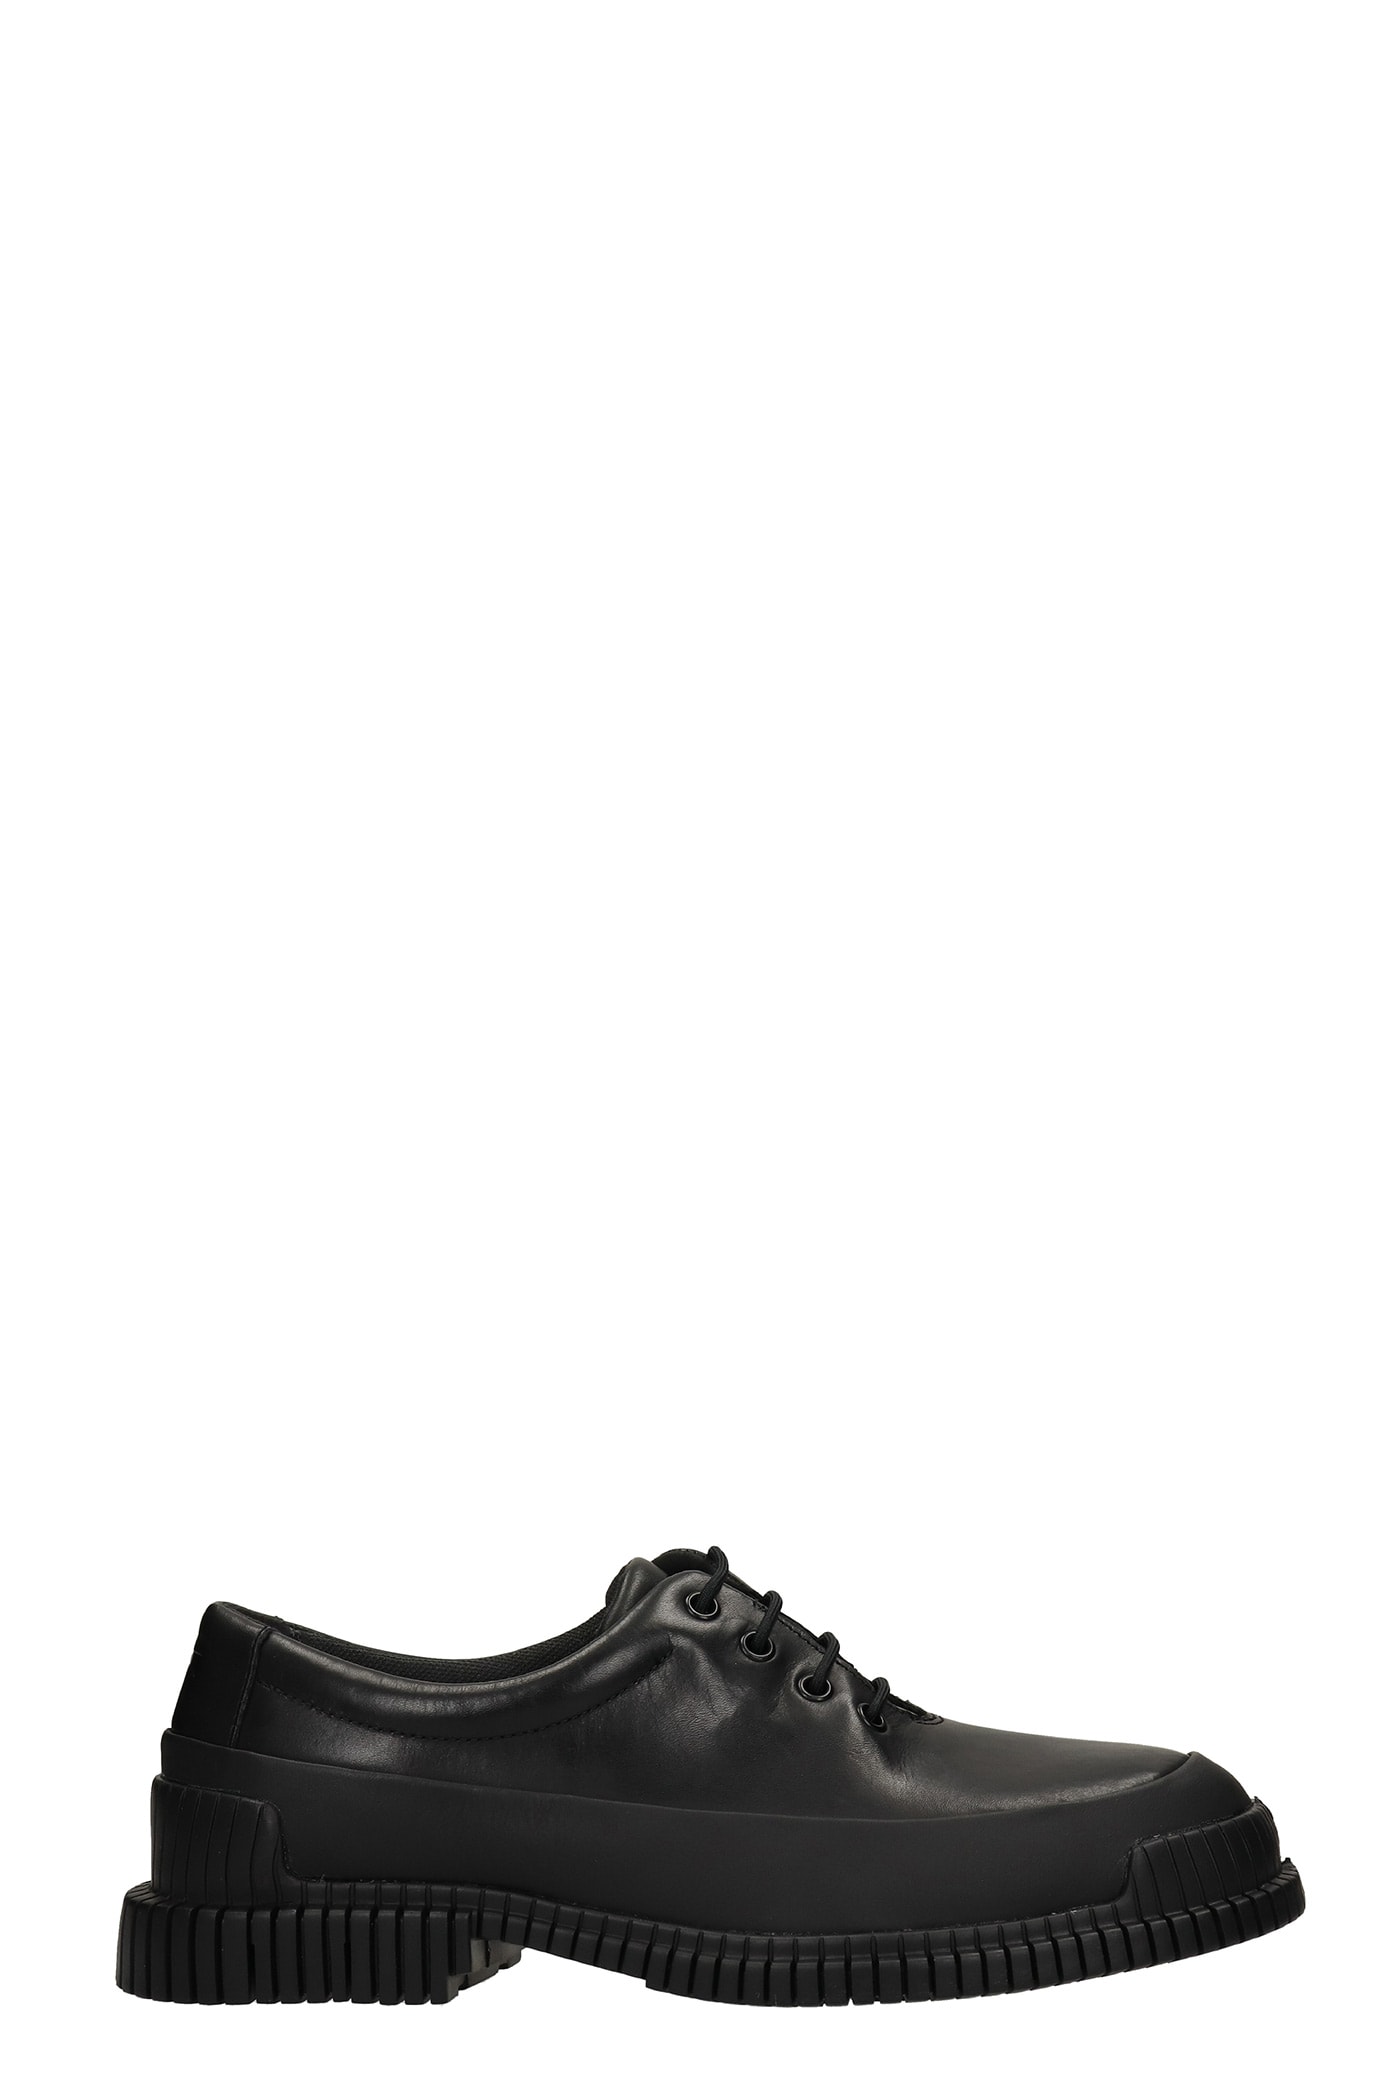 Camper Pix Lace Up Shoes In Black Leather